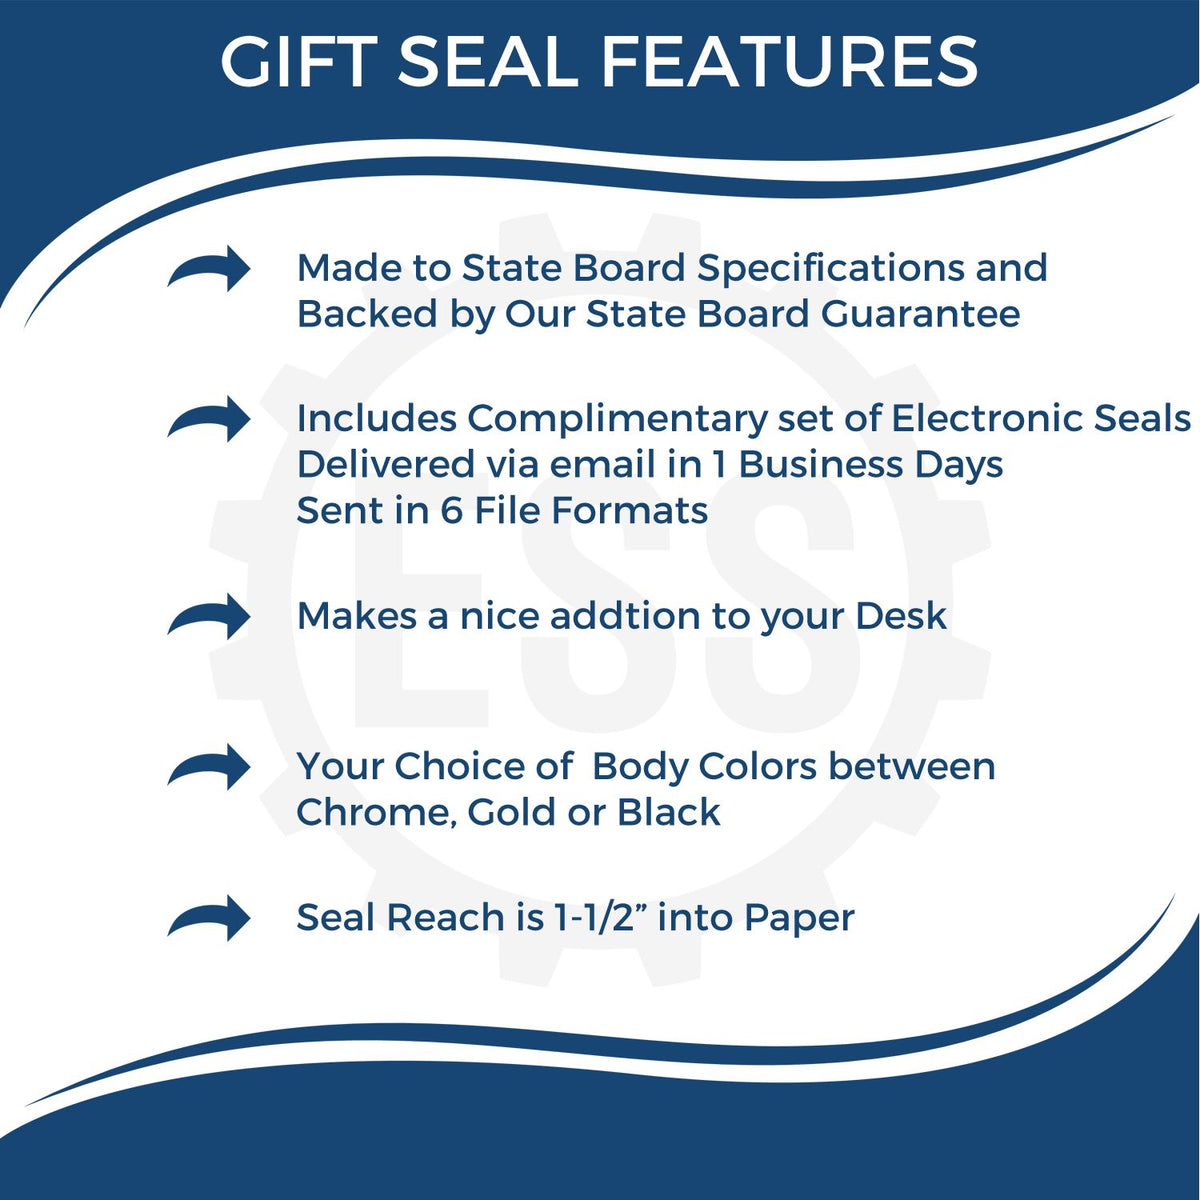 A picture of an infographic highlighting the selling points for the Gift Iowa Land Surveyor Seal